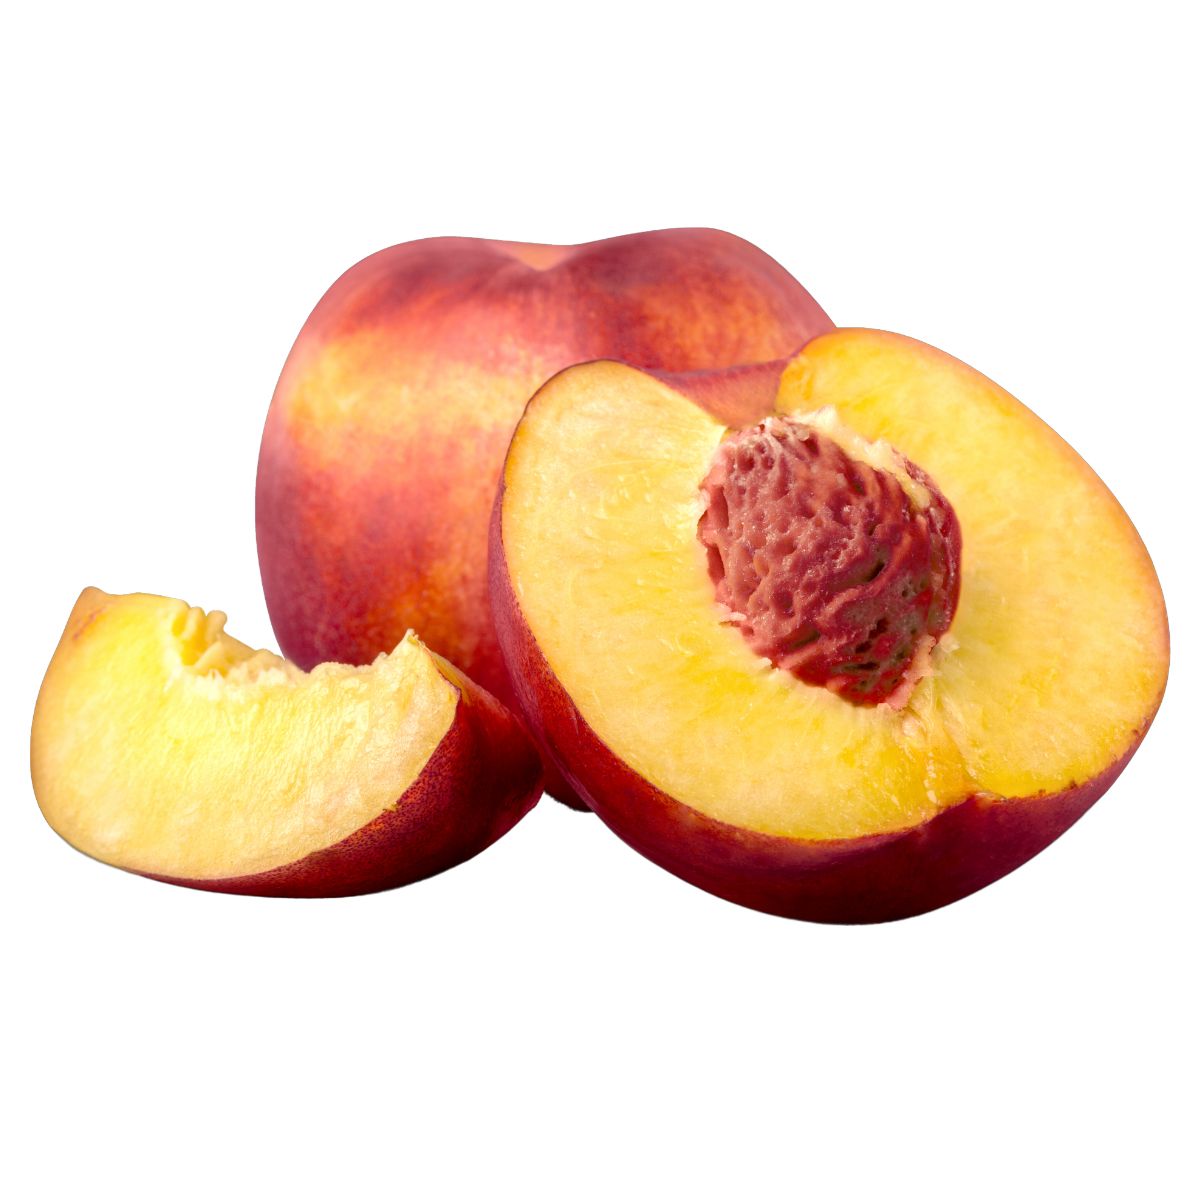 Two whole nectarines and a slice, one Nectarines - Each halved showing the pit, isolated on a white background.